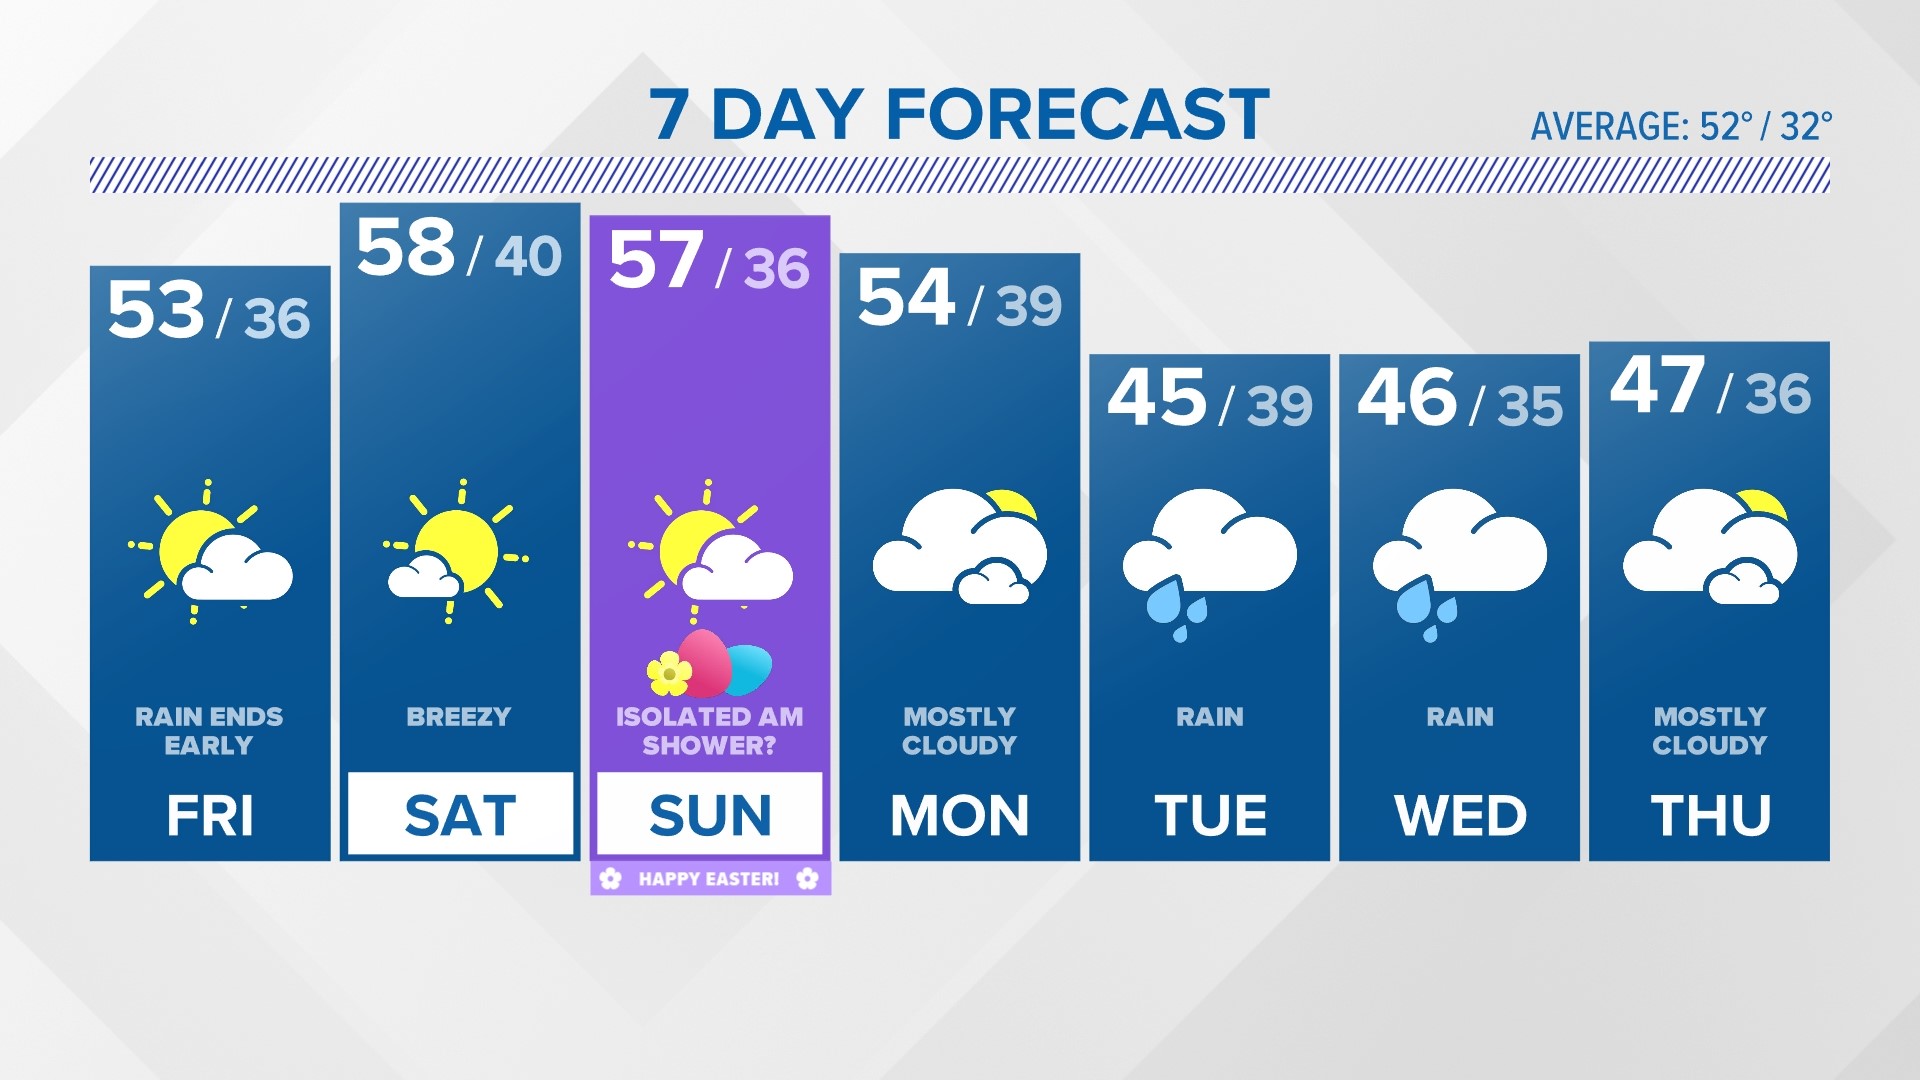 After a wet Thursday, drier weather moves in Friday into this weekend.